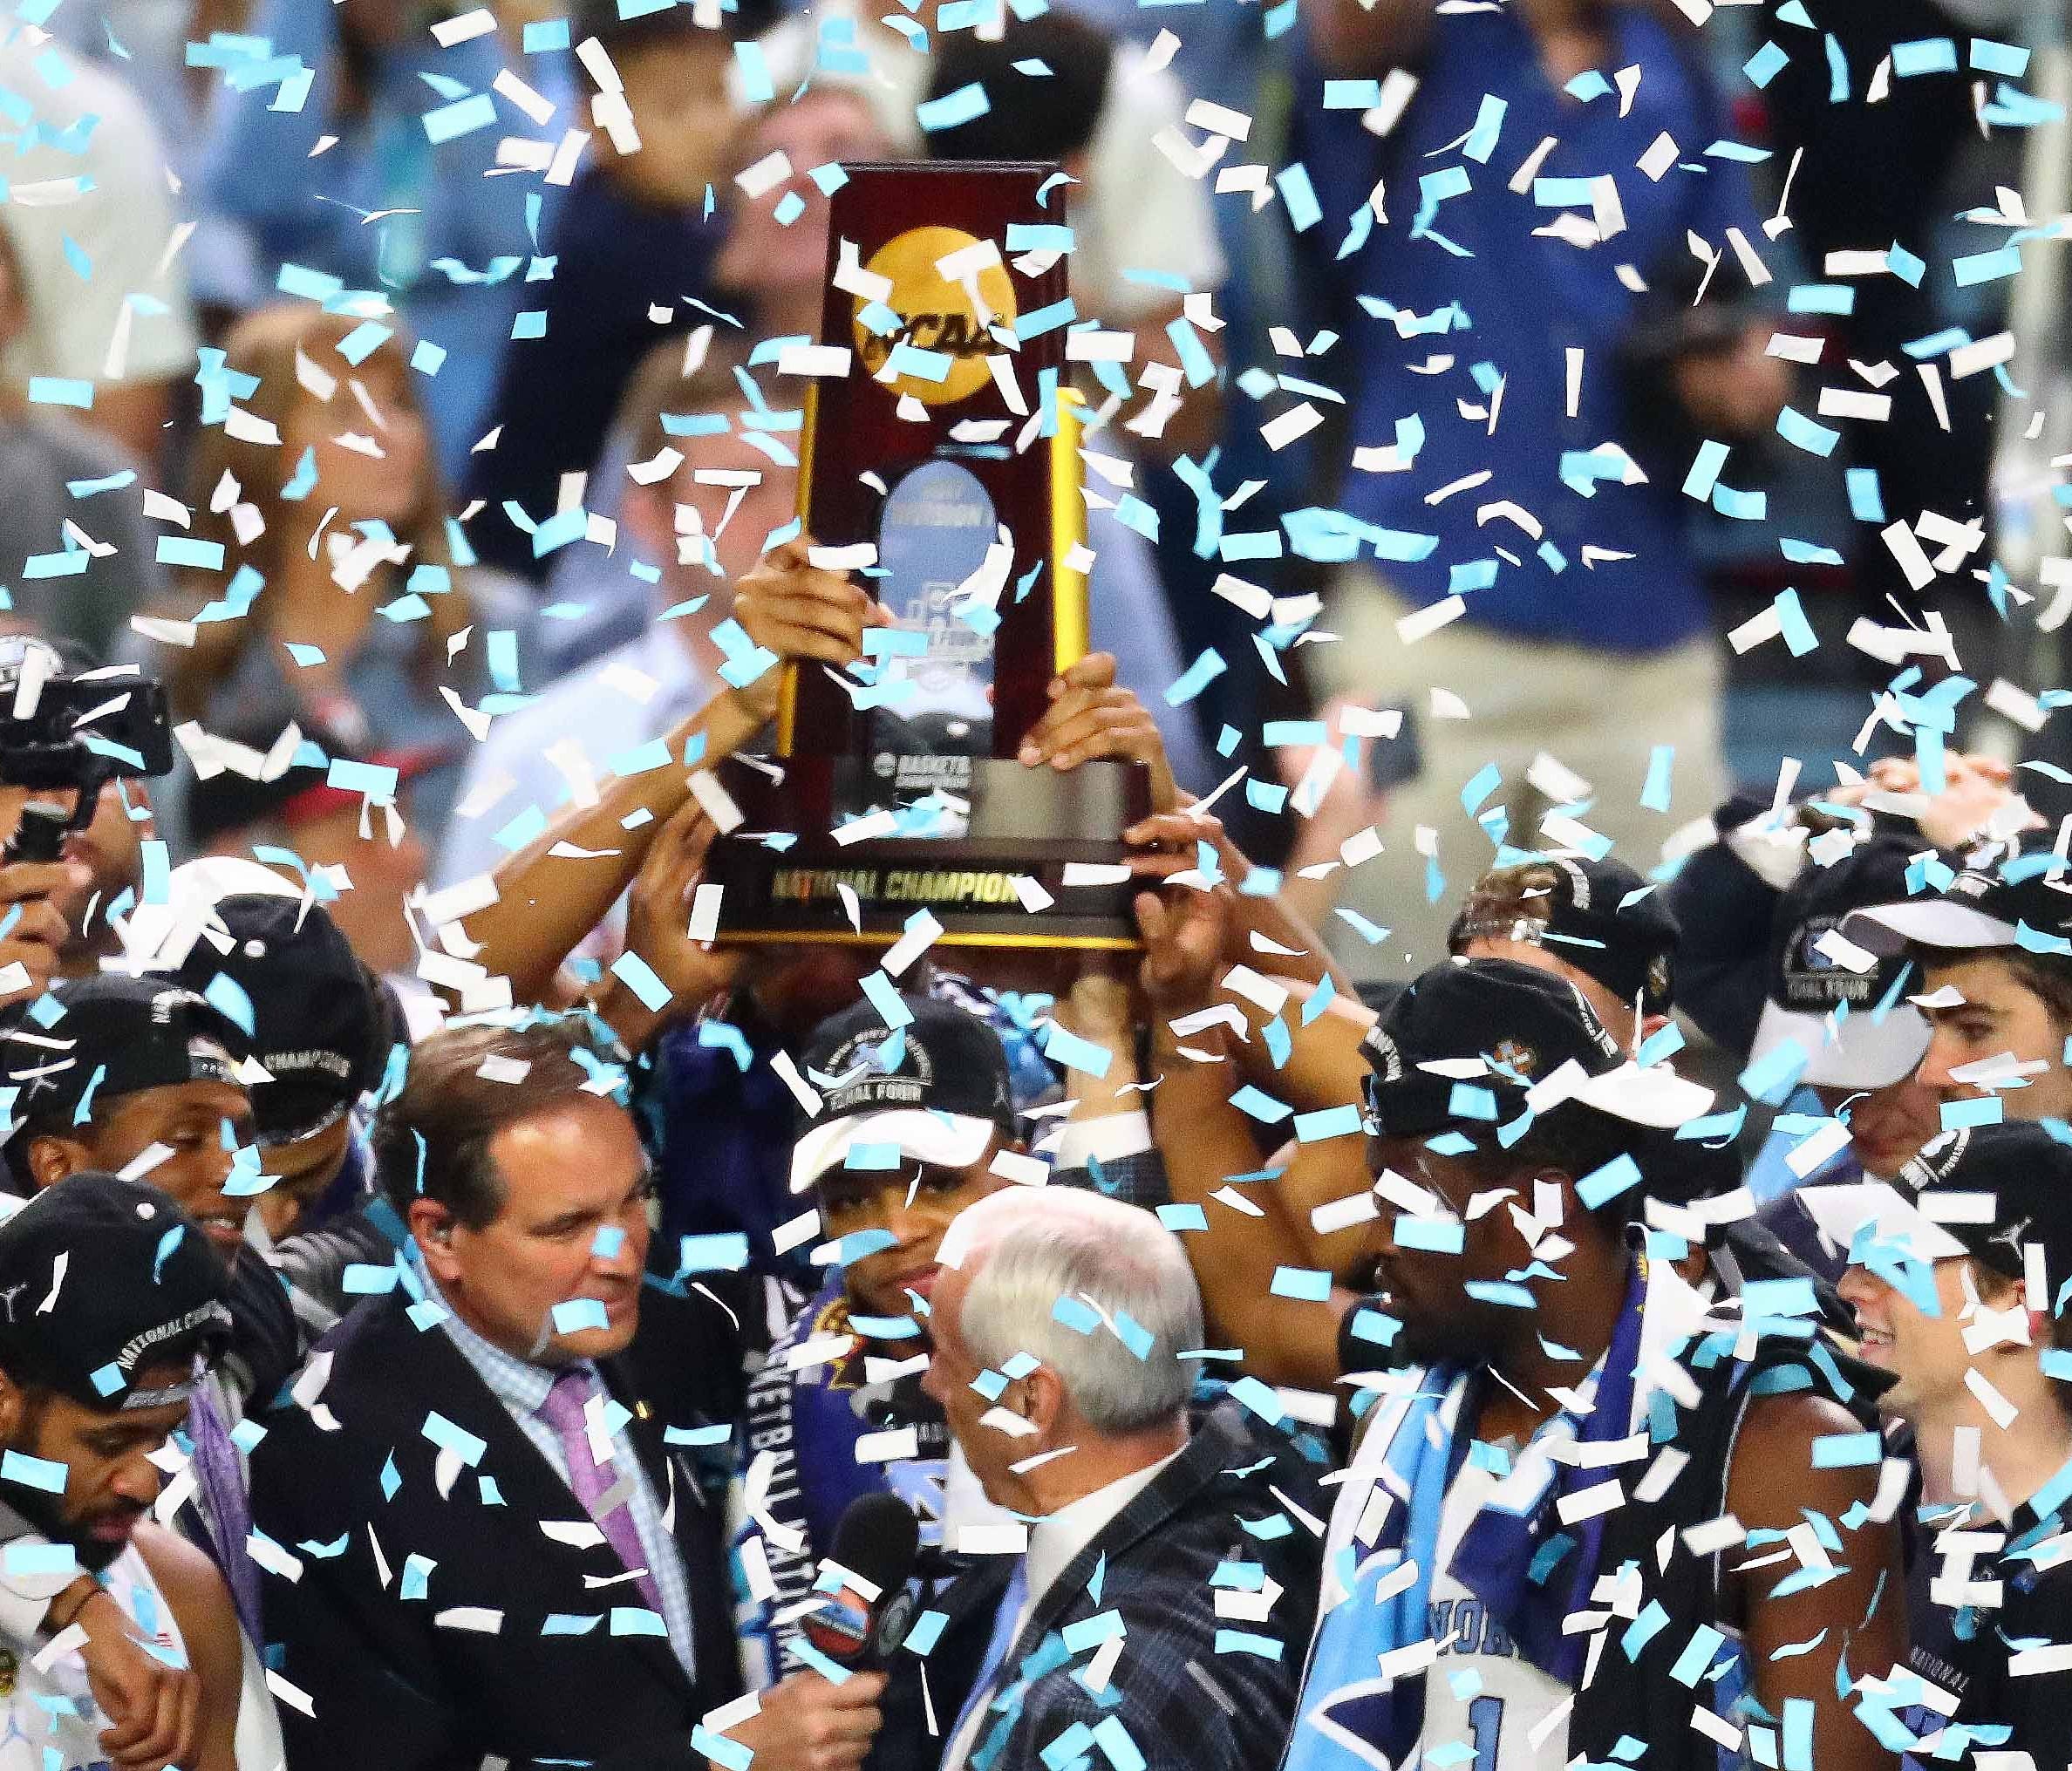 The confetti falls at the 2017 Final Four.